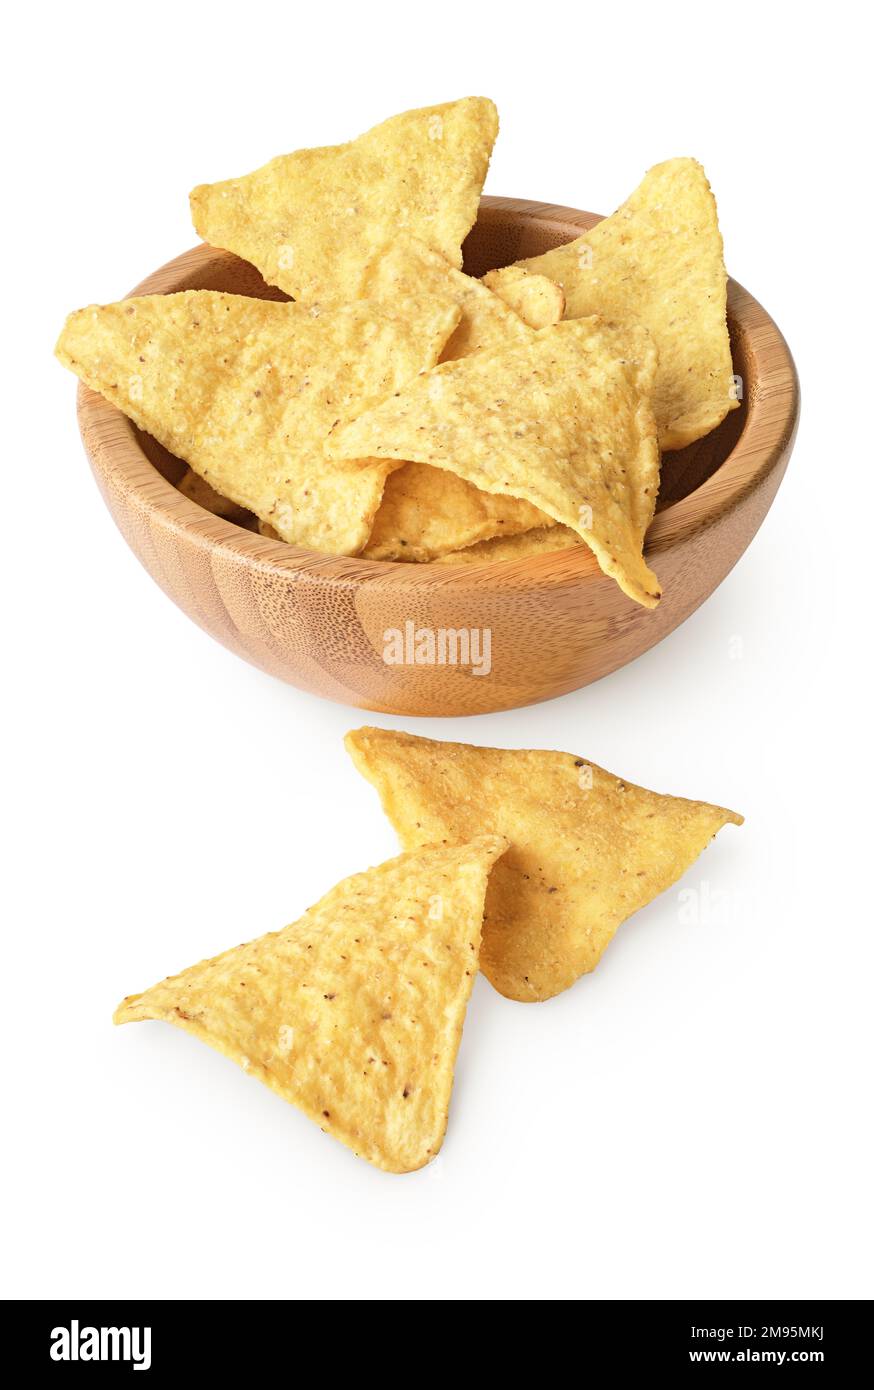 Corn chips in wooden bowl, isolated on white background Stock Photo